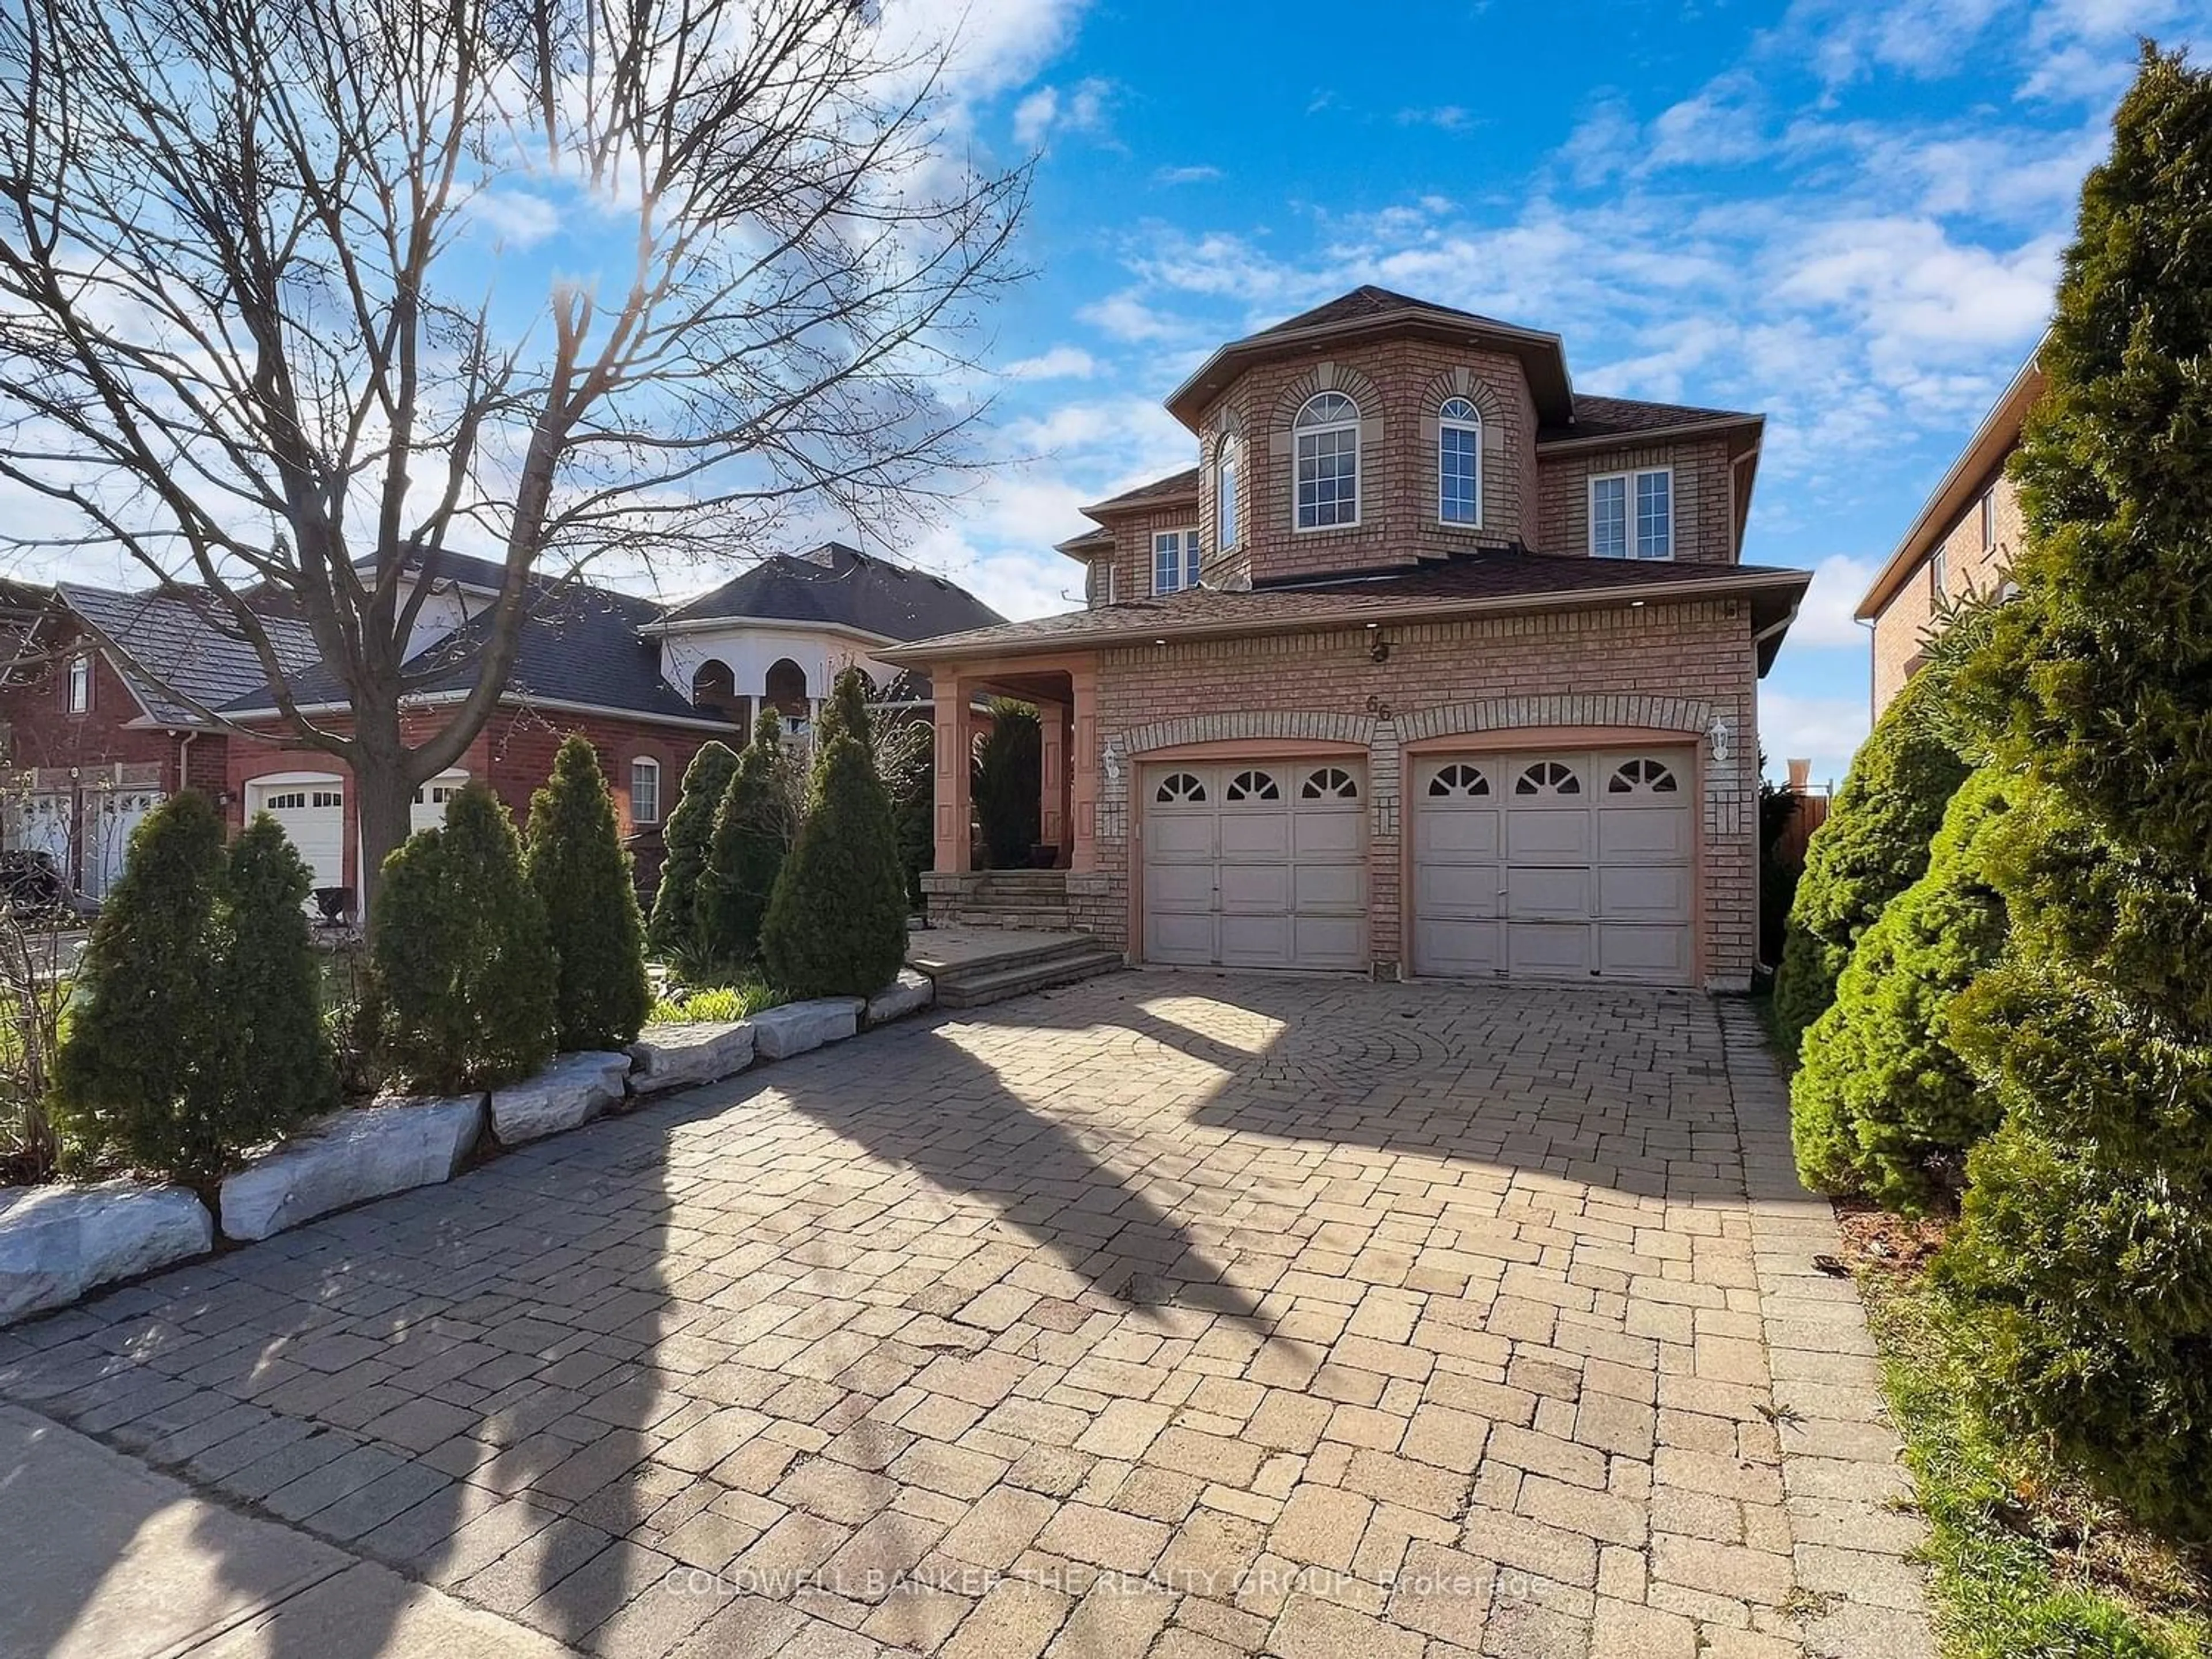 Home with brick exterior material for 66 Collingwood Ave, Brampton Ontario L7A 1L7